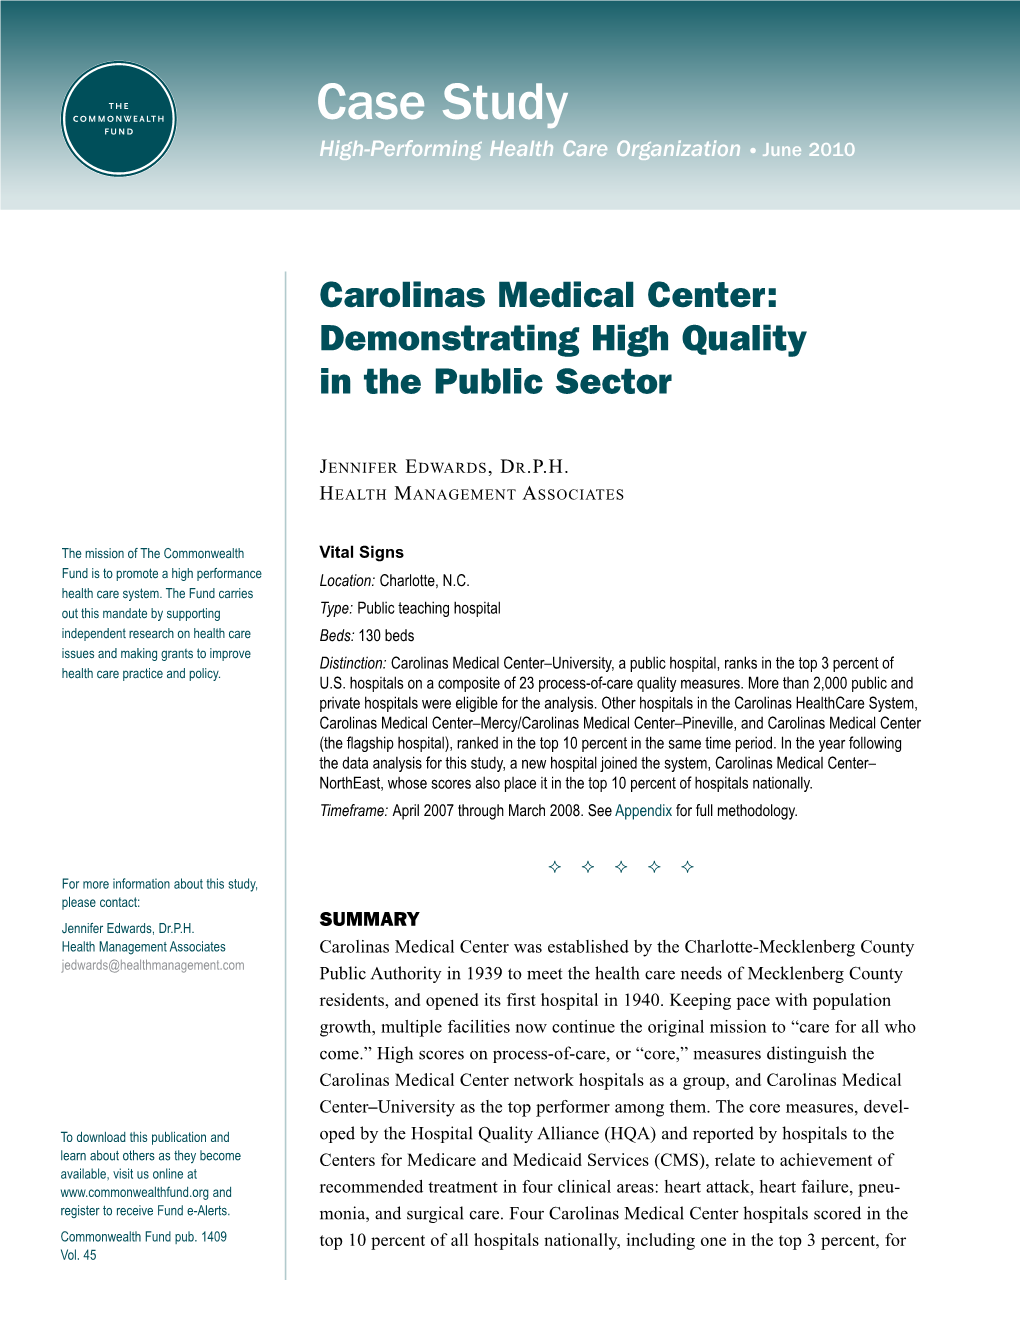 Carolinas Medical Center: Demonstrating High Quality in the Public Sector